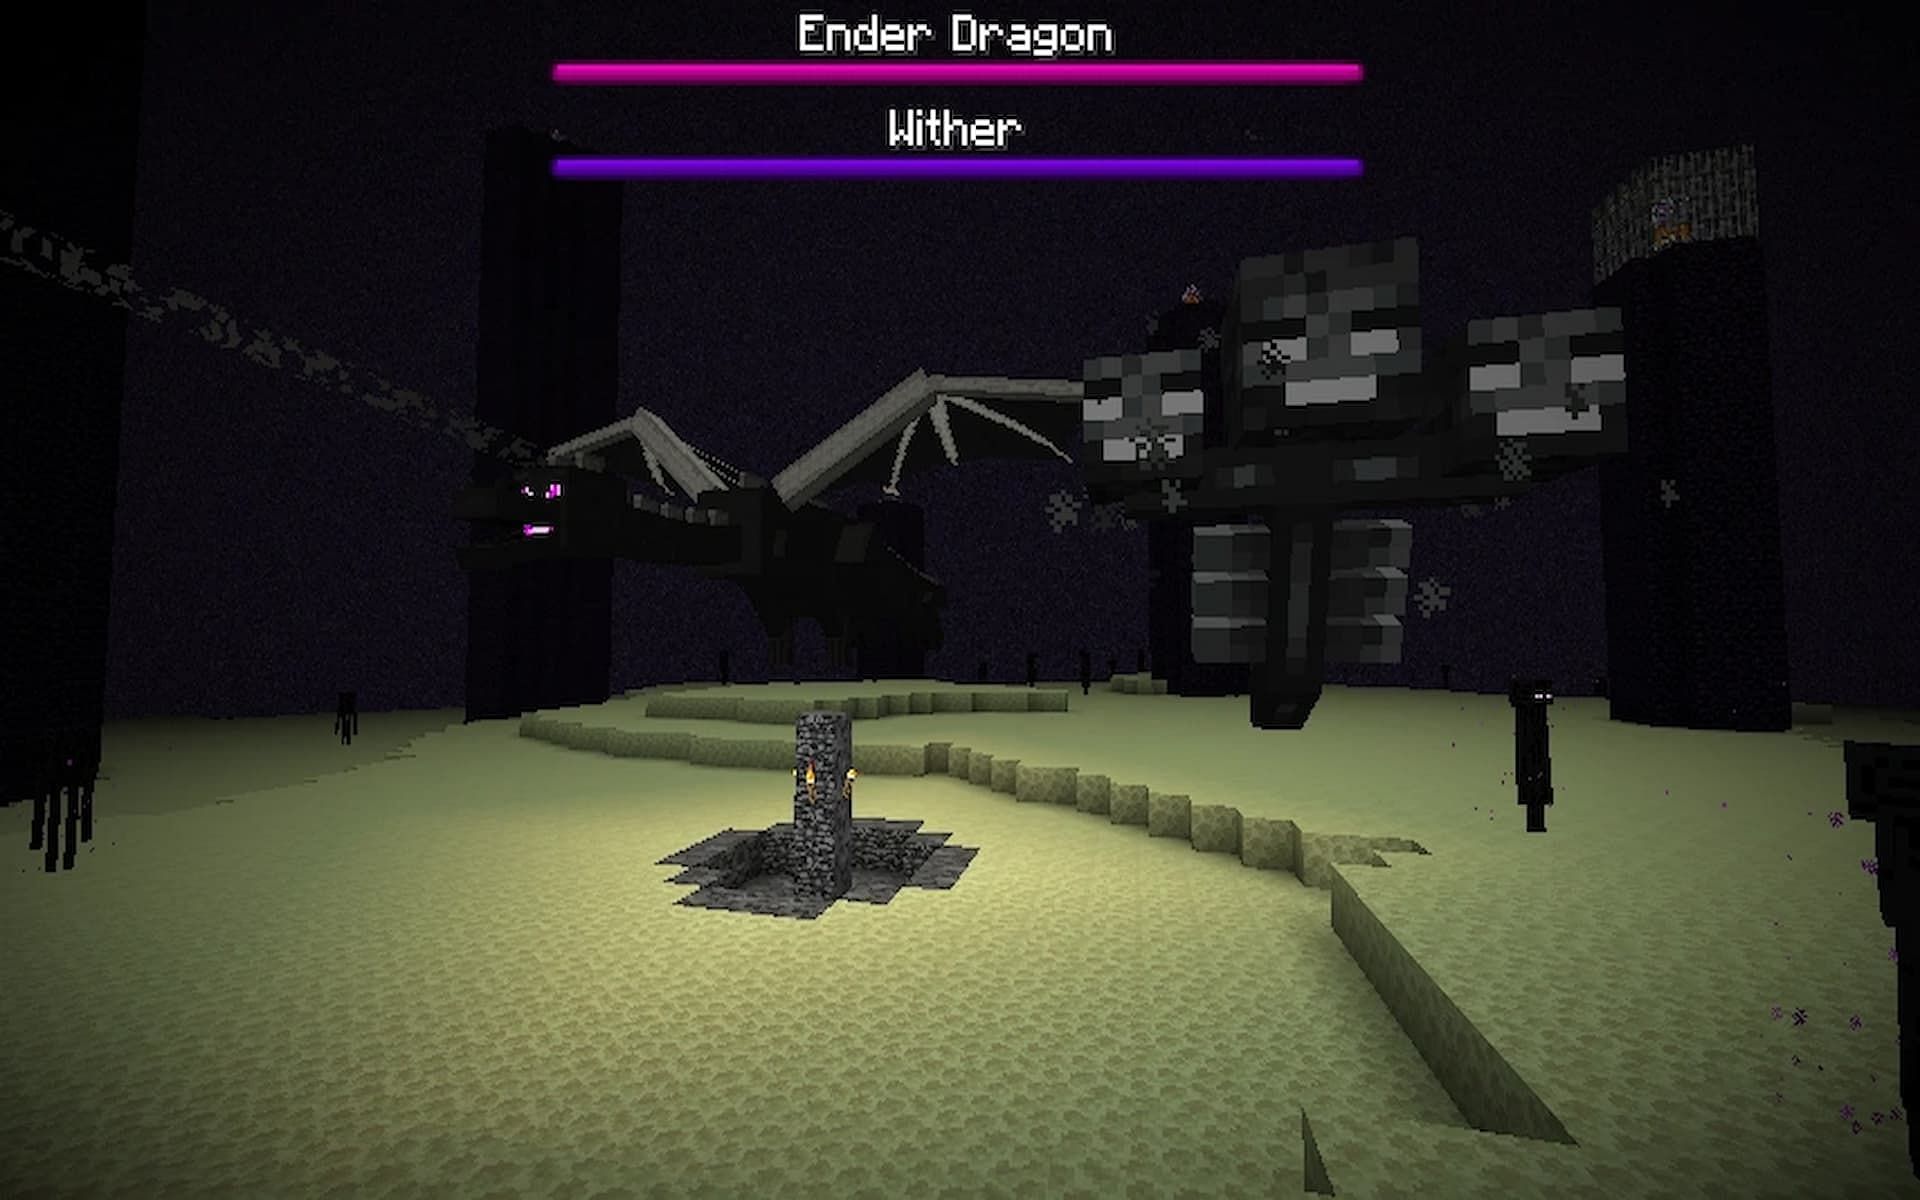 Fans can speculate about the addition of a new boss being added to Minecraft (Image via Minecraft.Fandom.com)